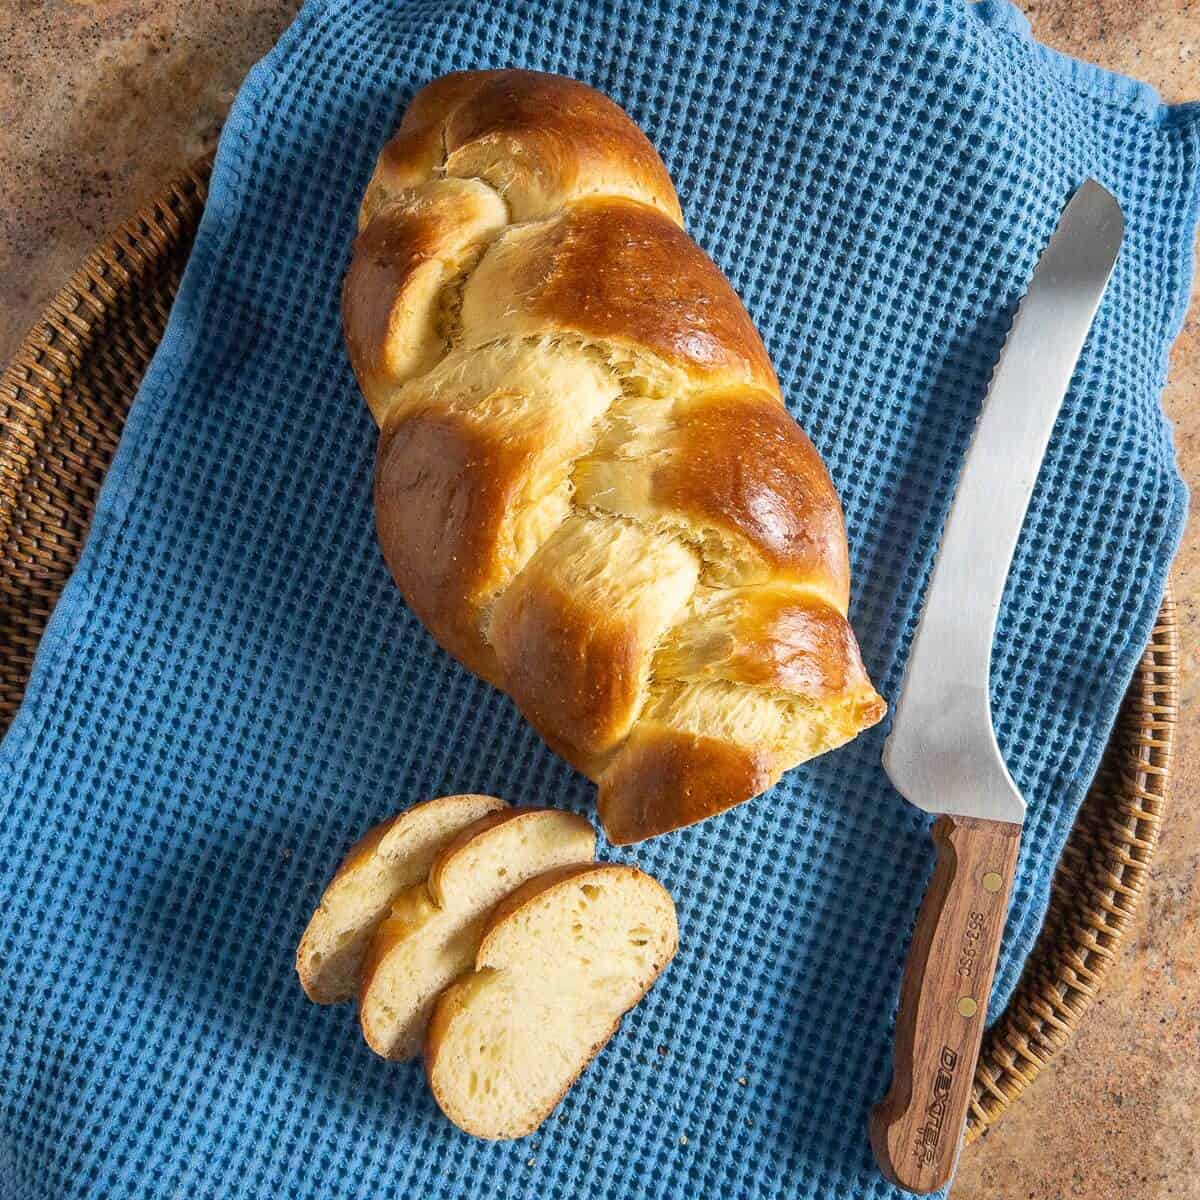 Sliced challah loaf on a blue towel next to a bread knife viewed from overhead.